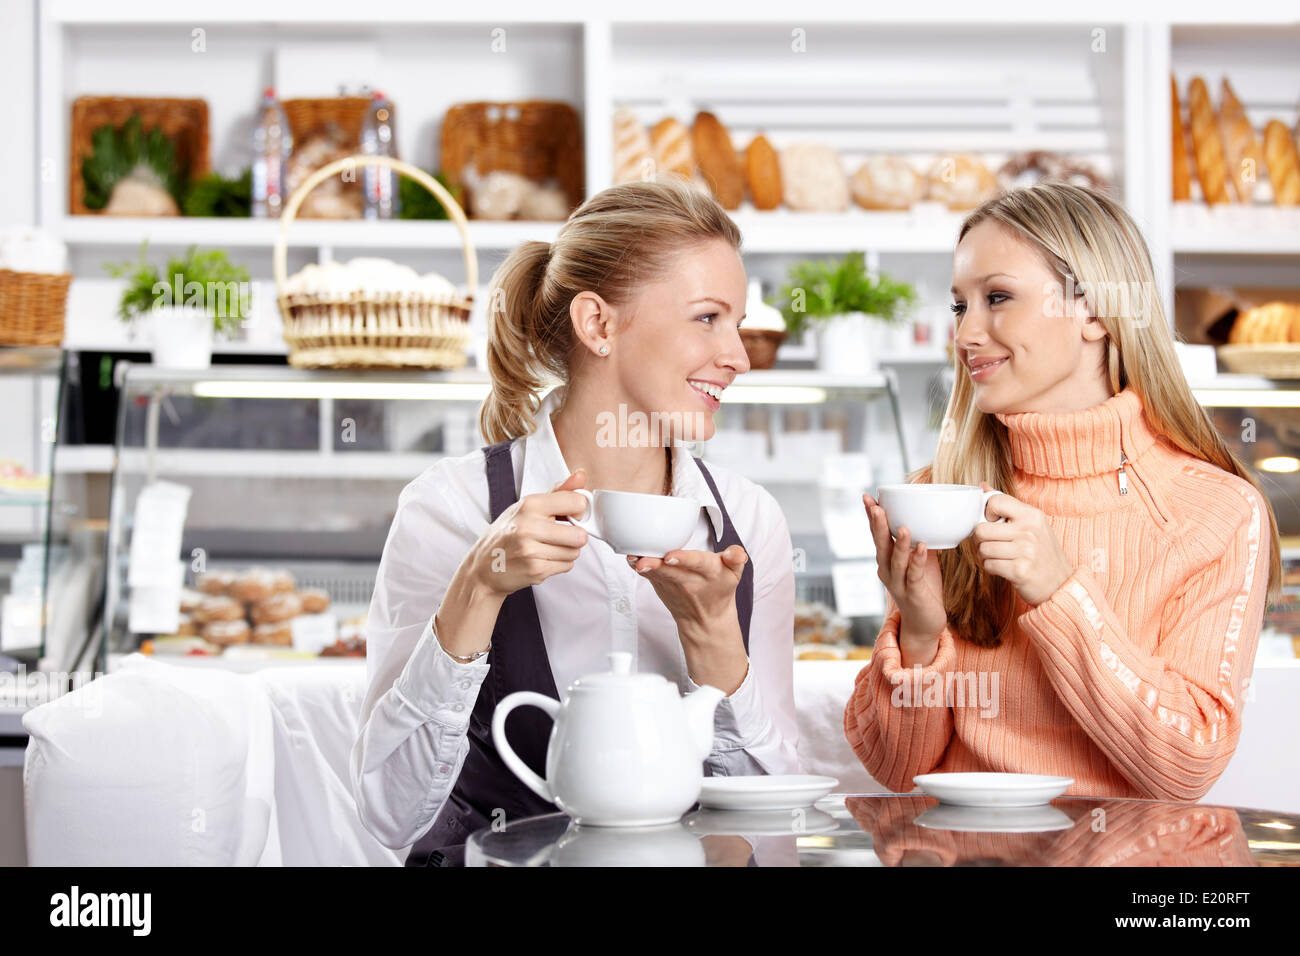 Two nice girls drink tea in cafe Stock Photo